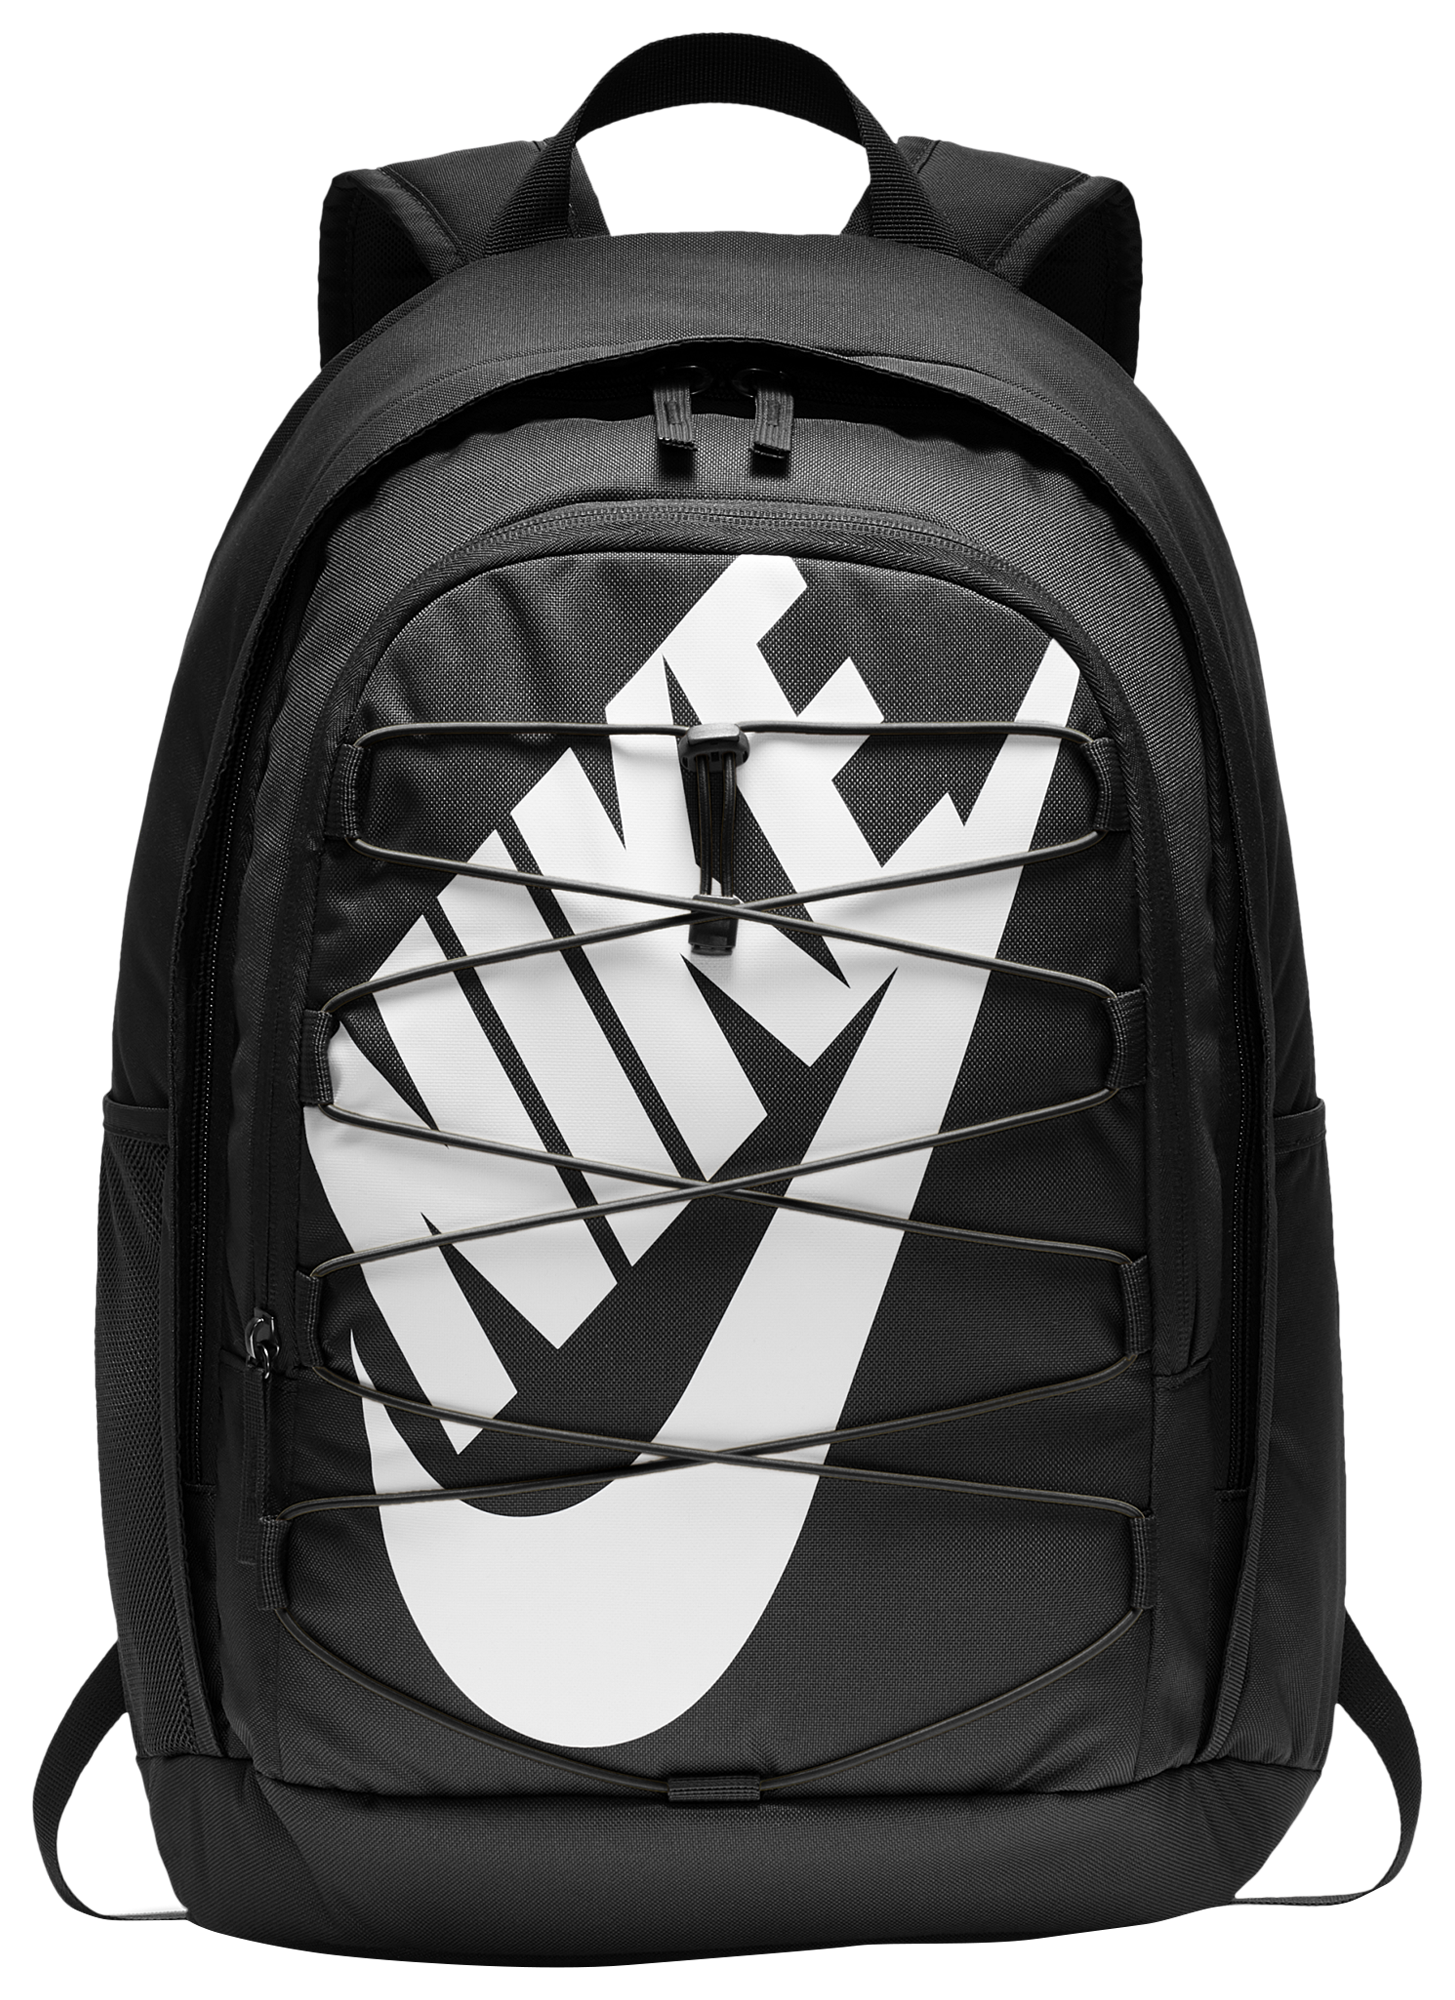 nike reign backpack cost